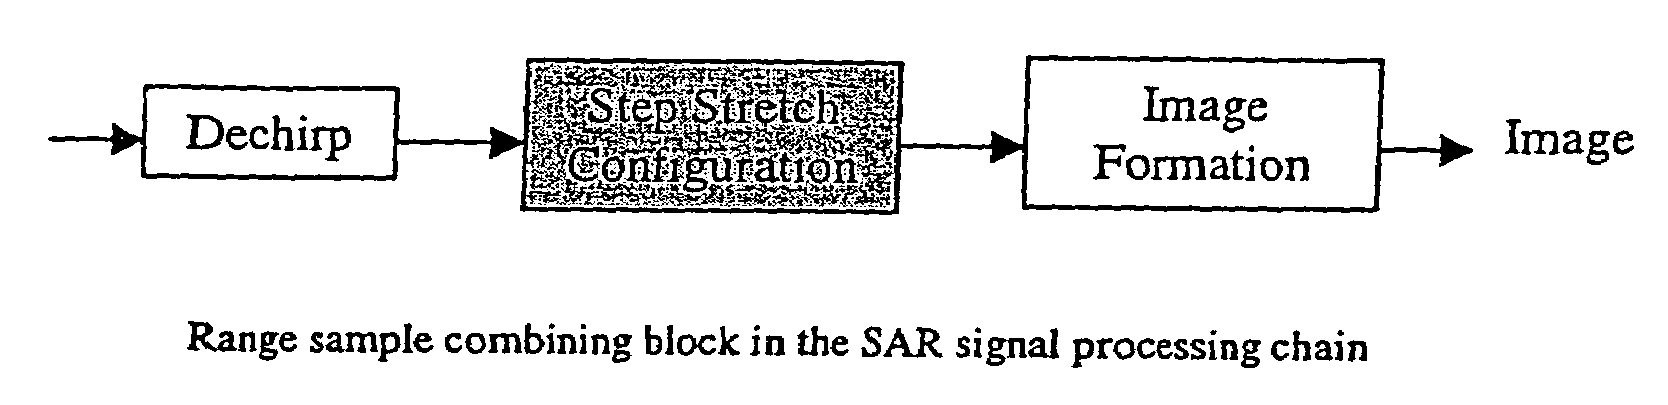 High resolution SAR processing using stepped-frequency chirp waveform